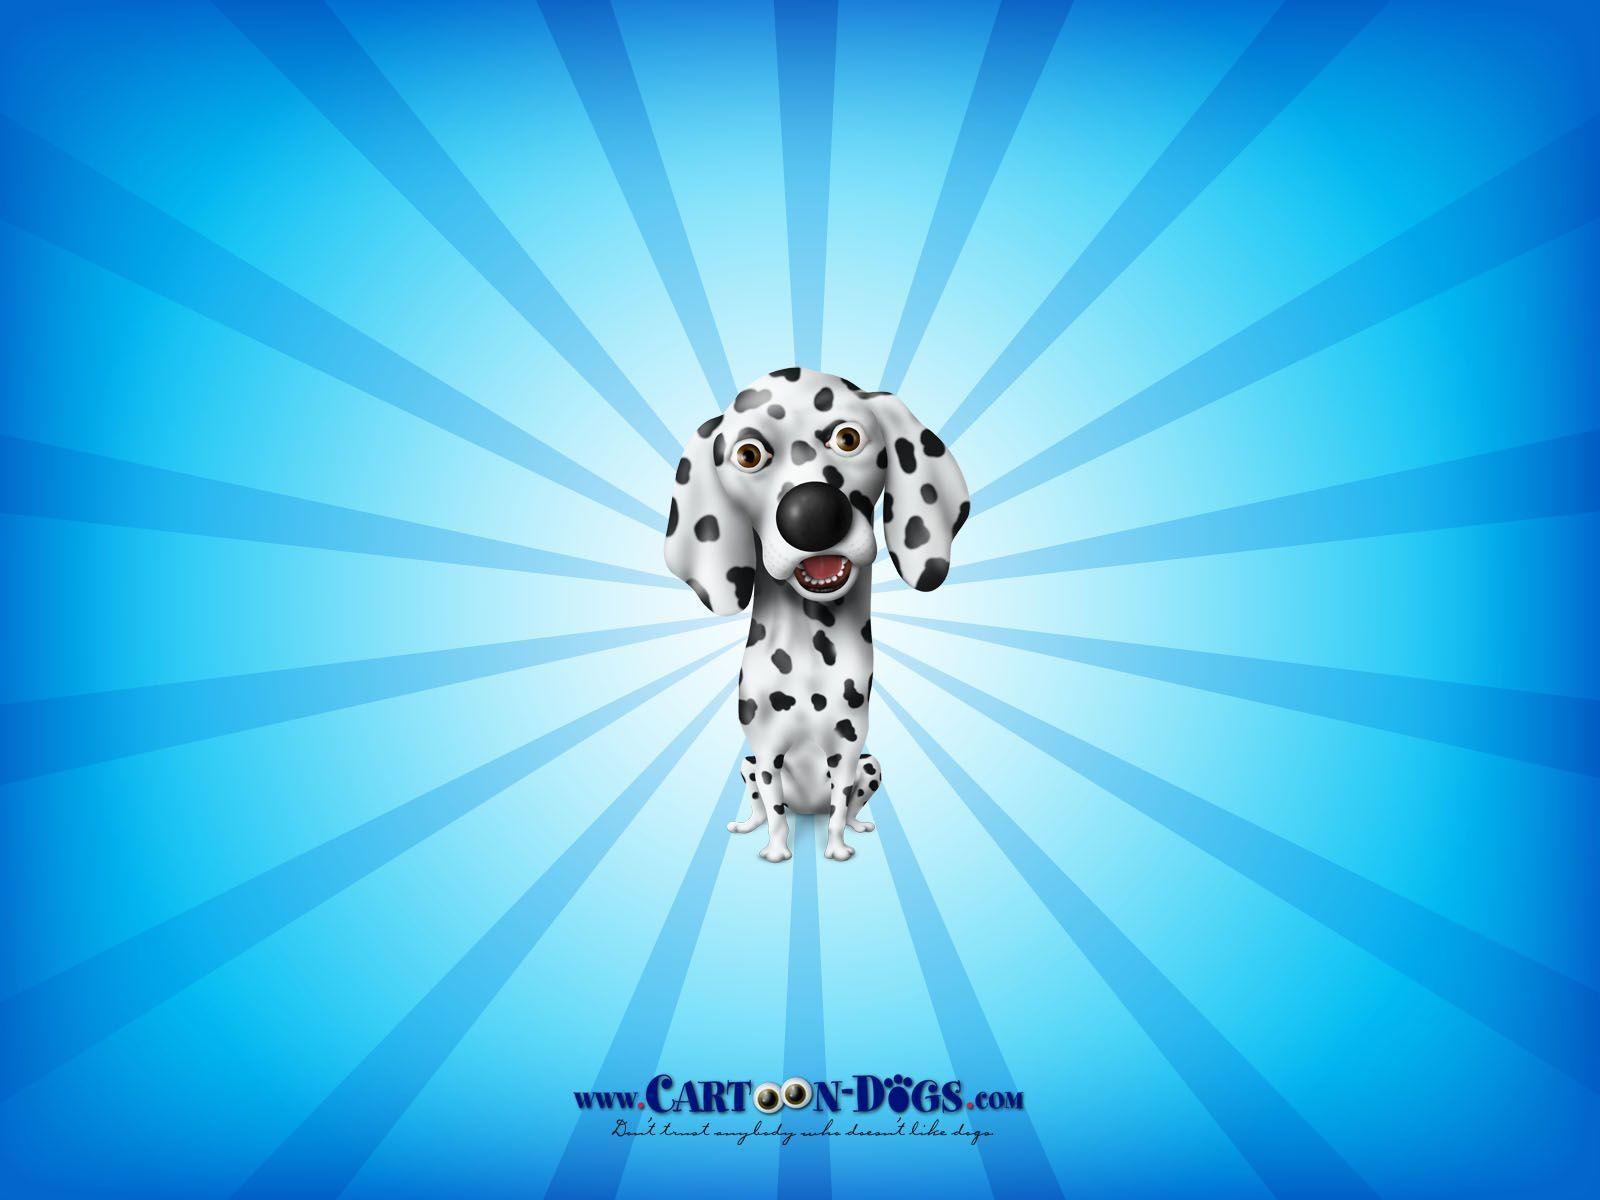 Dalmatian by Cartoon Dogs: Free downloads avatars, icons